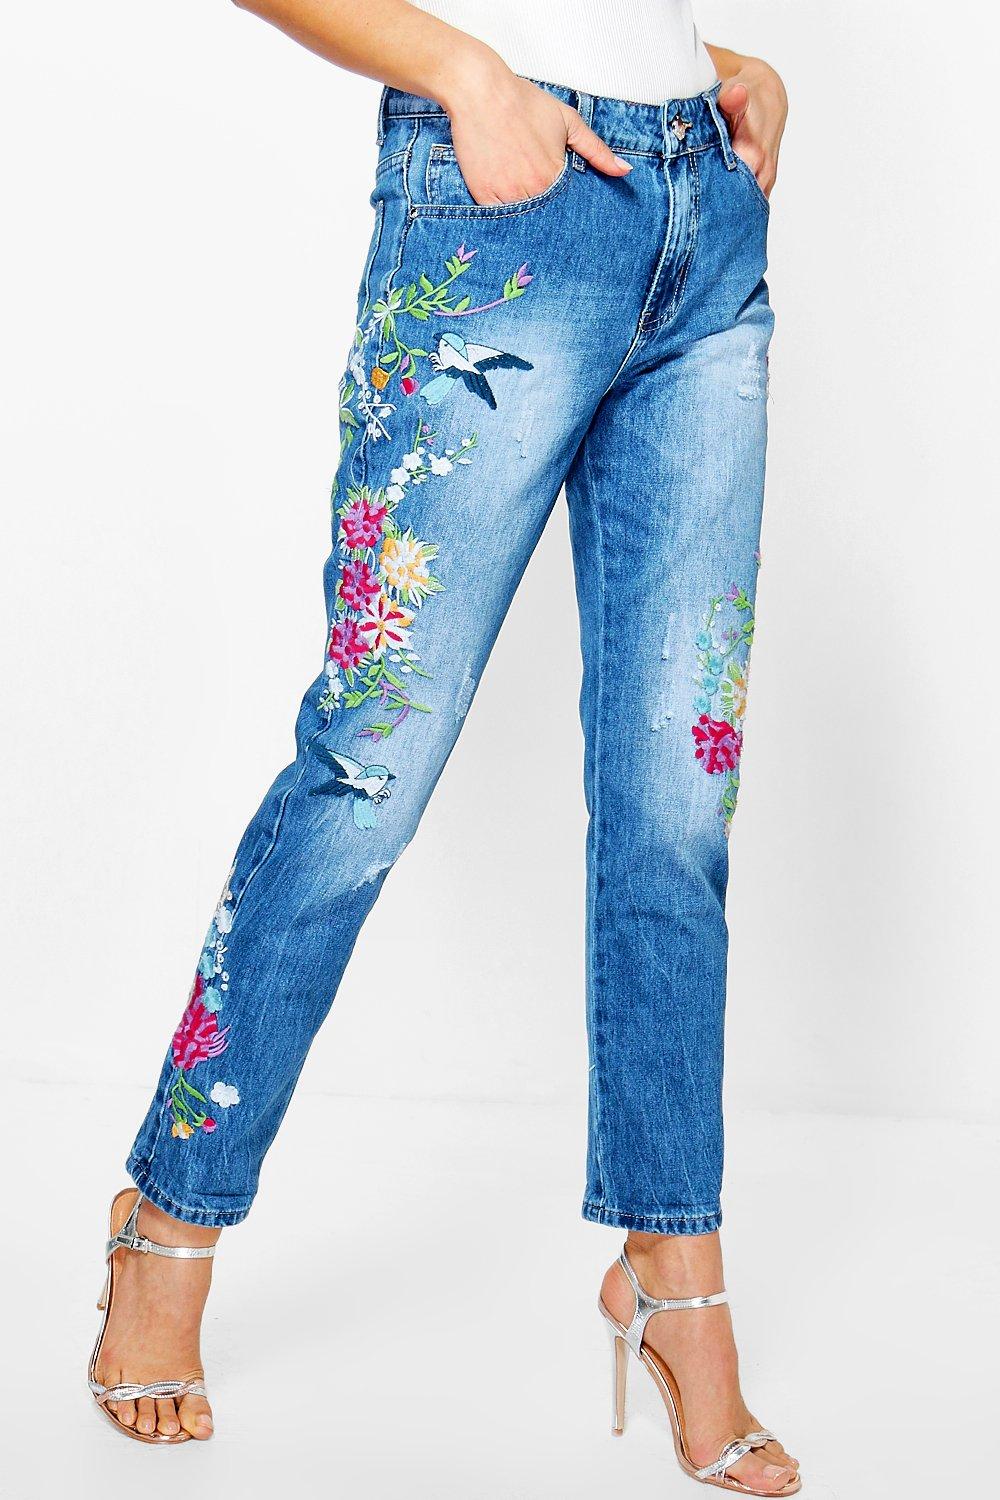 Boohoo Womens Molly Mid Rise All Over Embroidered Boyfriend Jeans | eBay